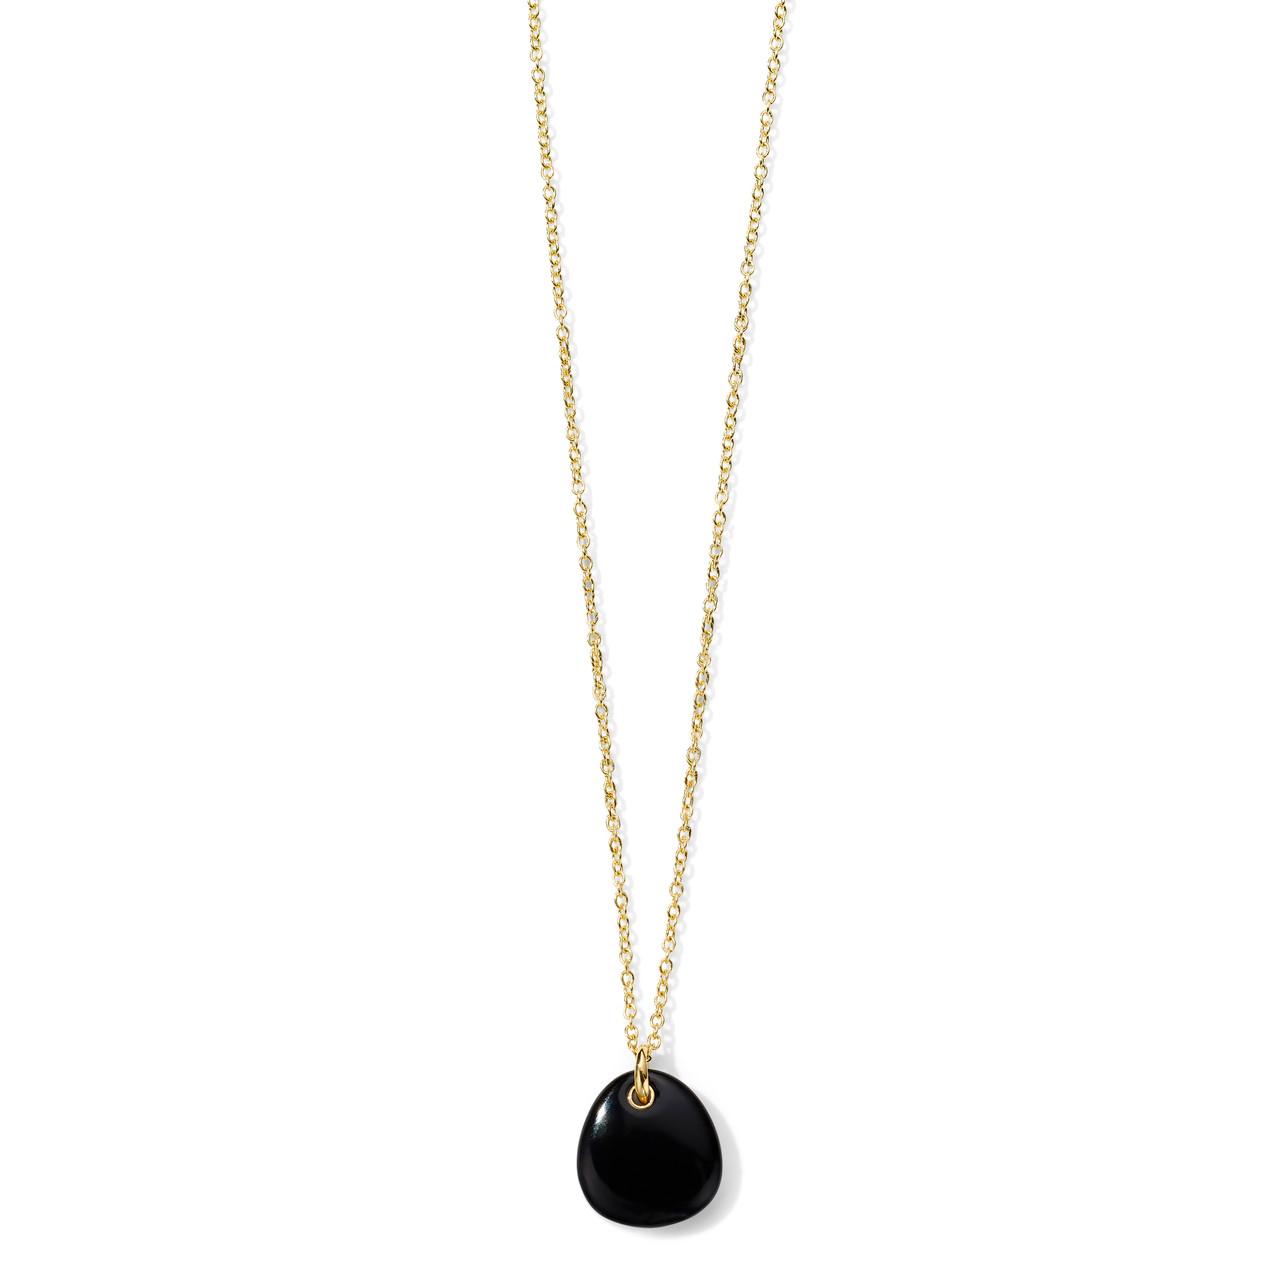 Ippolita Rock Candy Small Black Onyx Pebble Pendant Necklace in 18k Gold 0